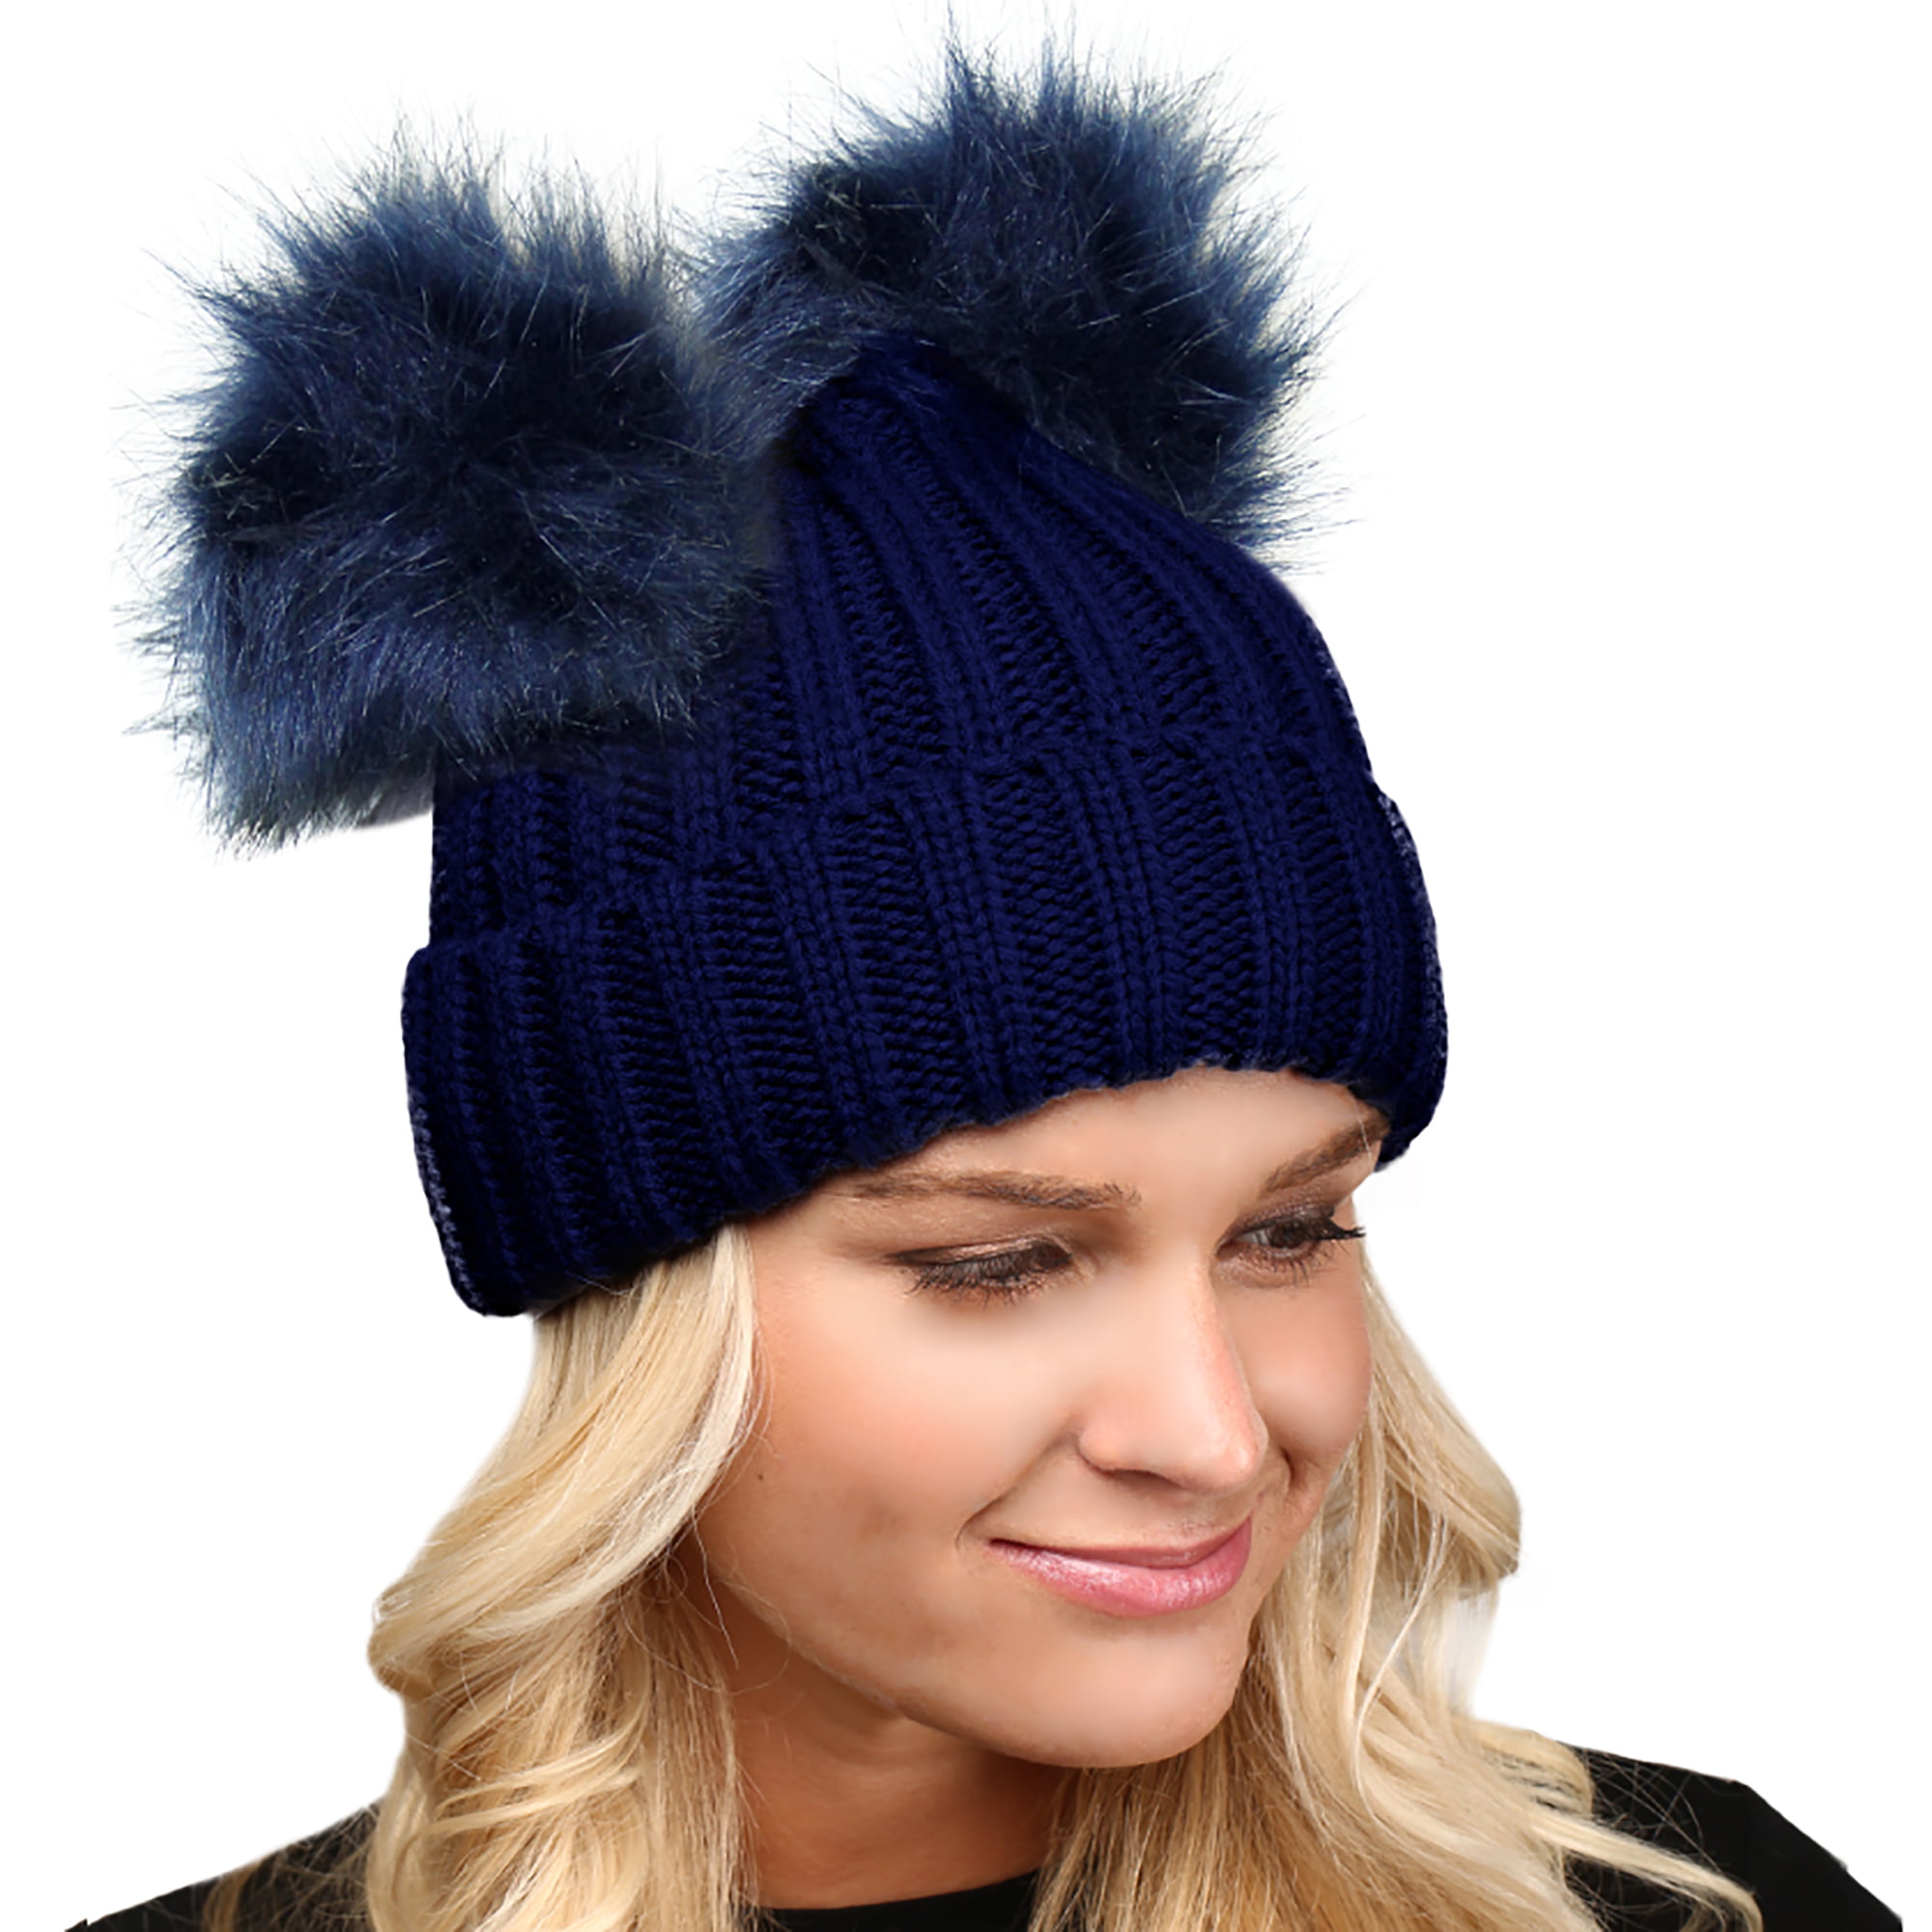 Gifts for Women Double Pom Pom Beanie Double Faux Fur Pom Pom Hat Women's knitted hat Soft knitted hat